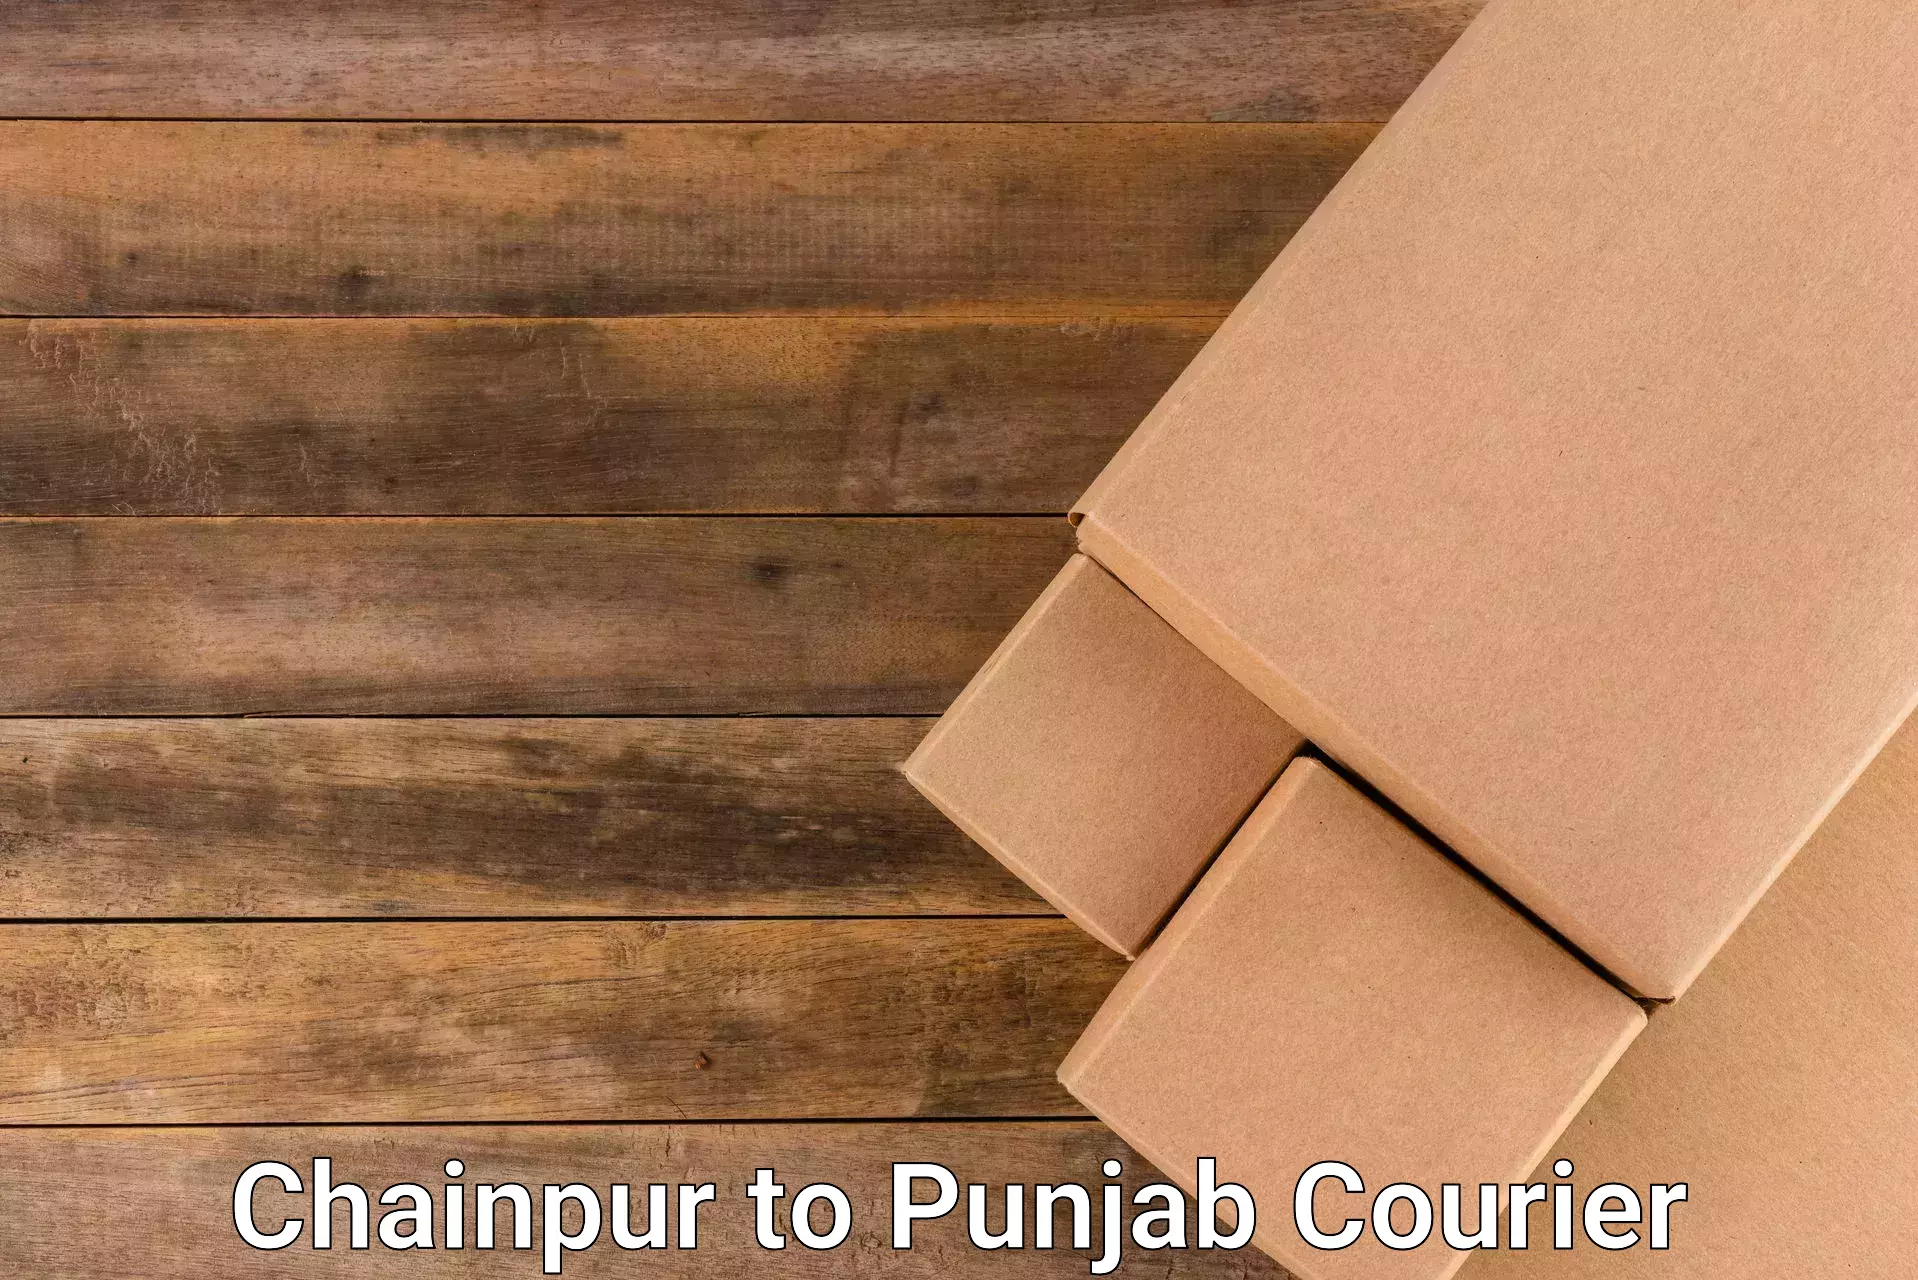 Automated parcel services Chainpur to Bathinda